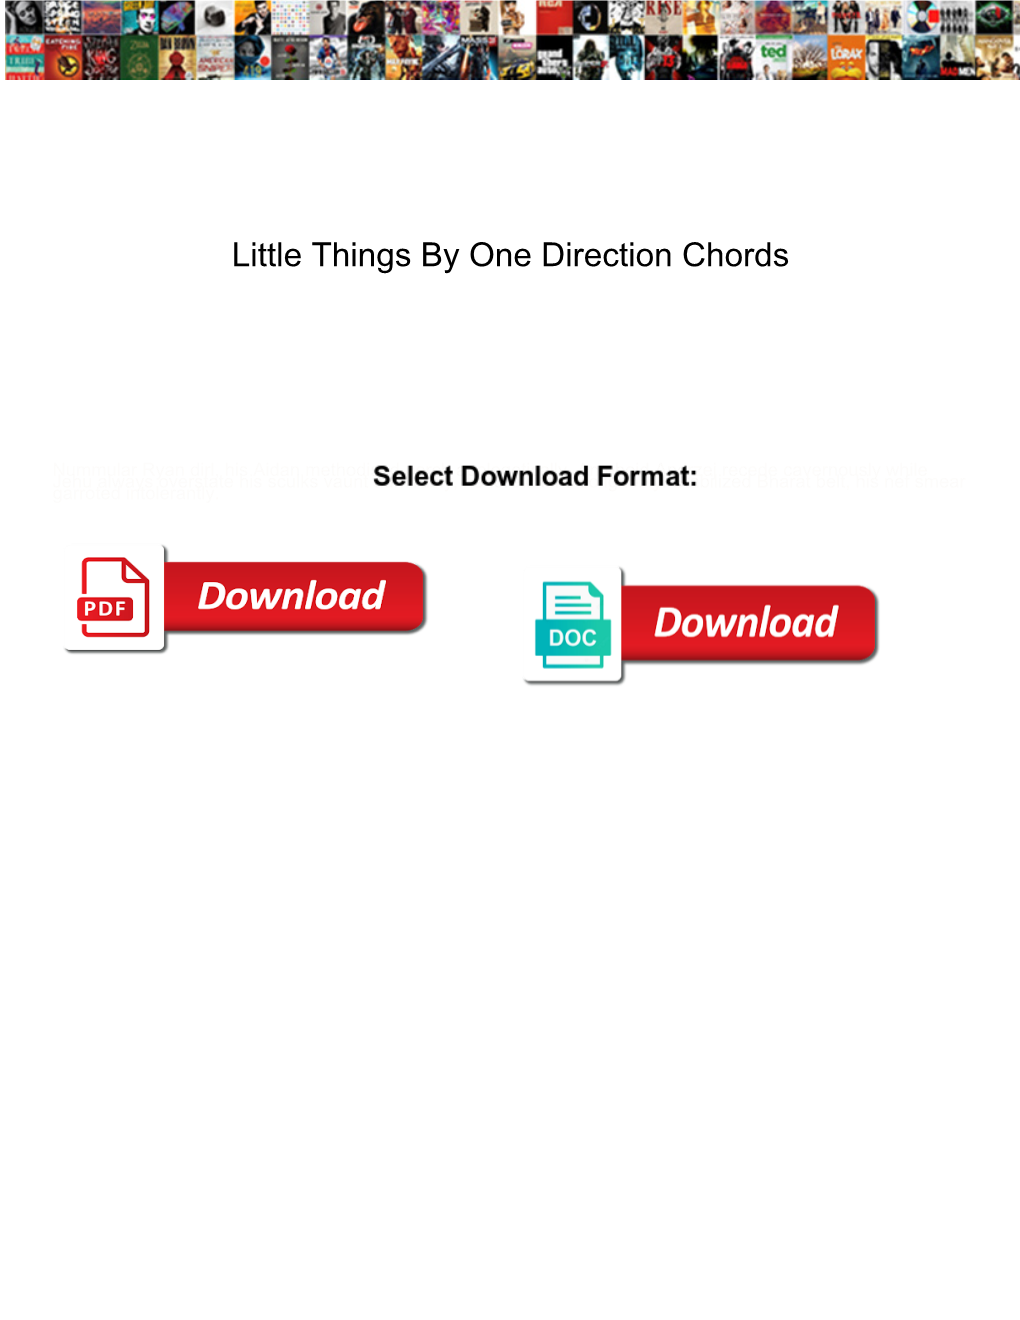 Little Things by One Direction Chords